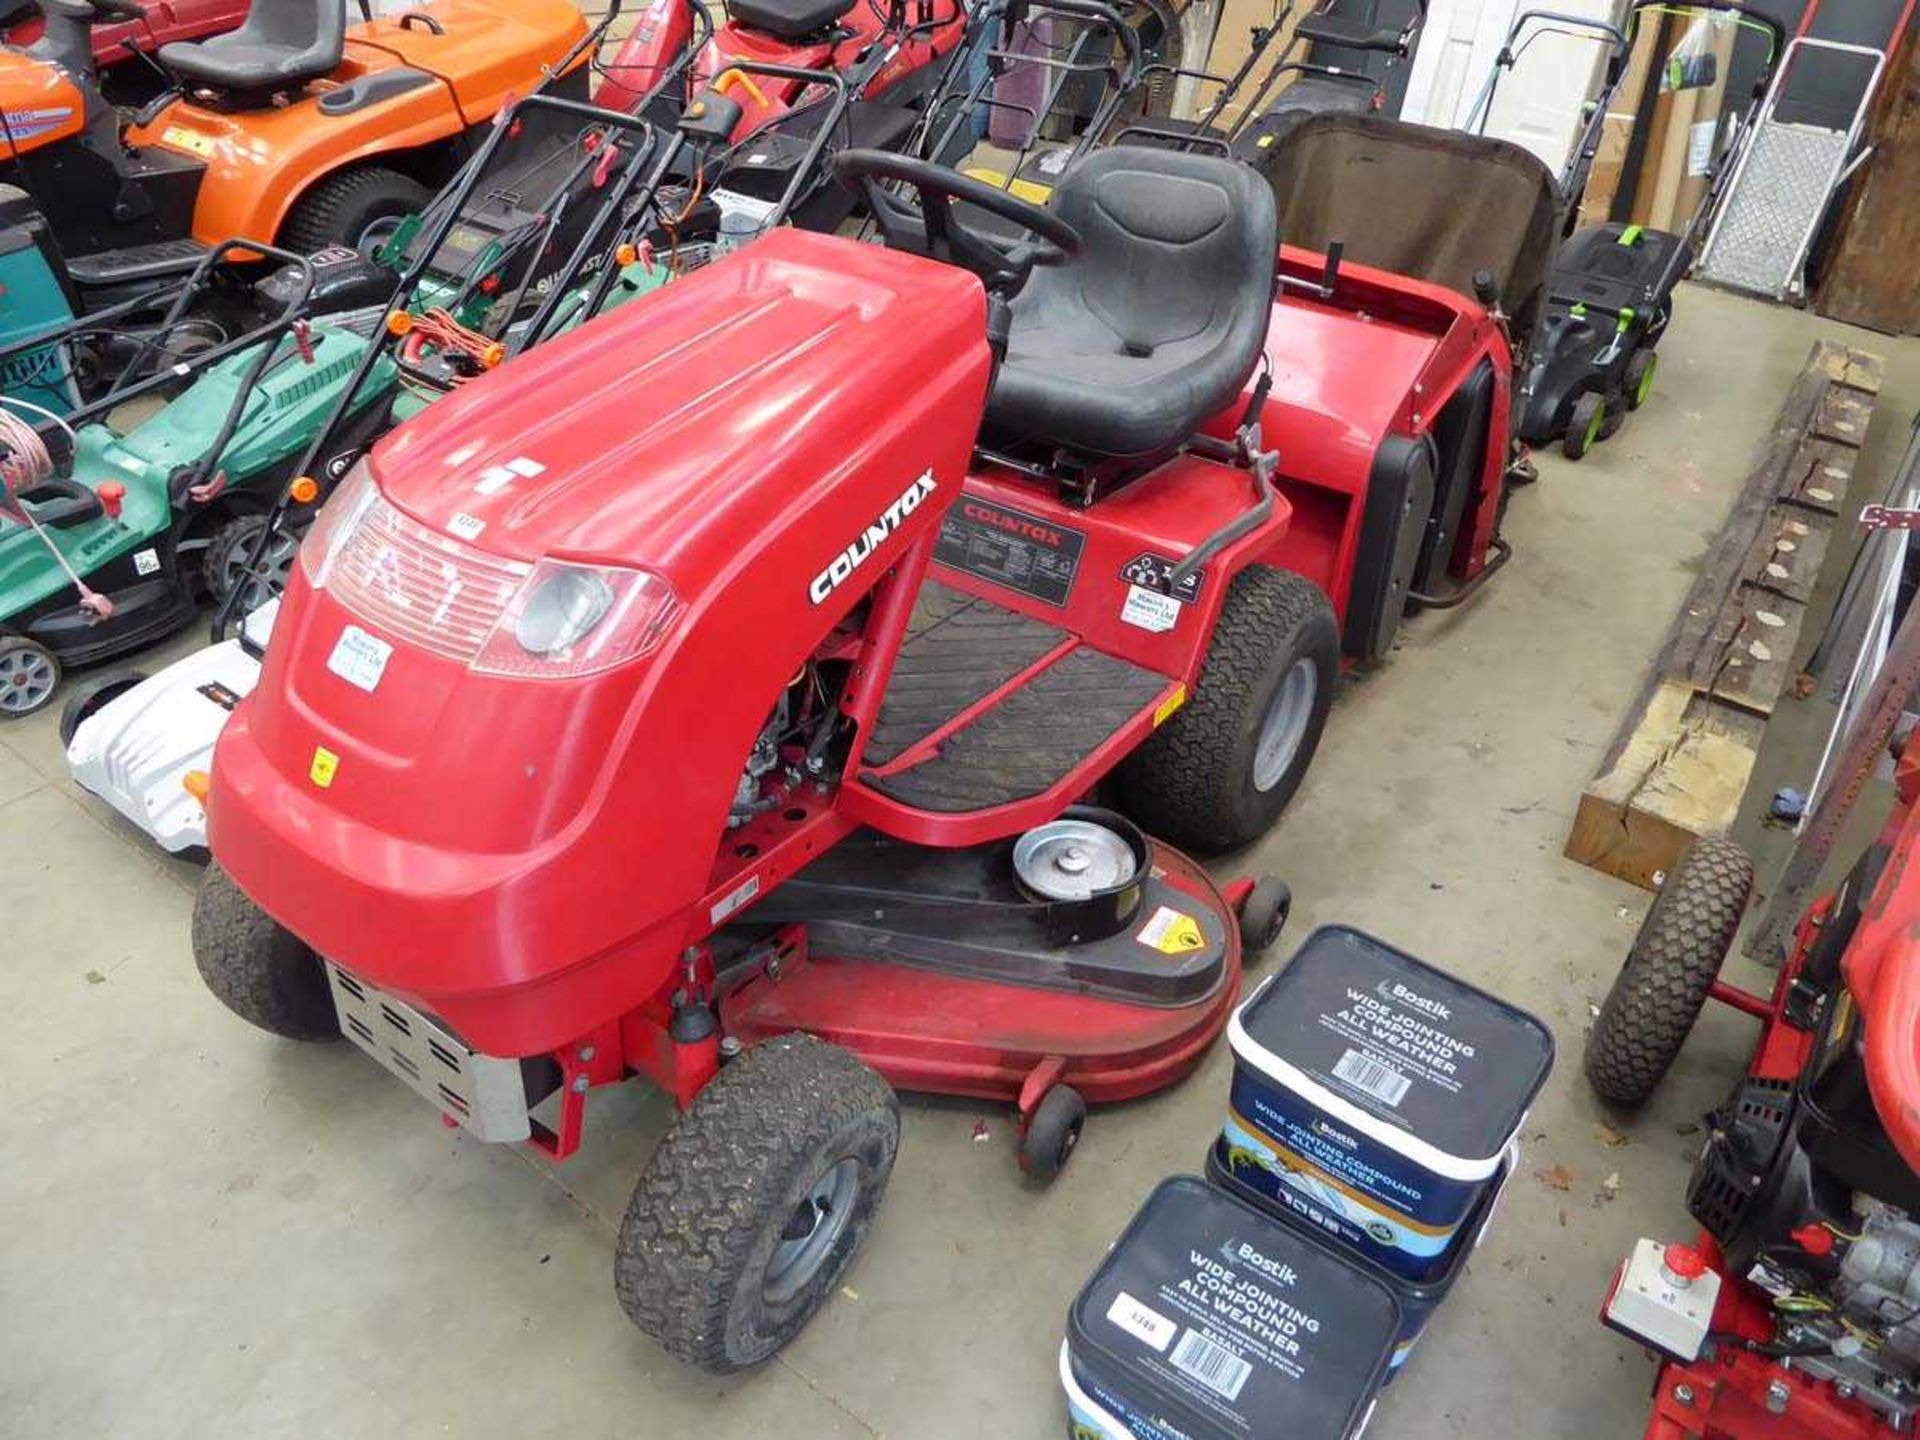 Countax C300M petrol powered ride on mower with grass collector and brush